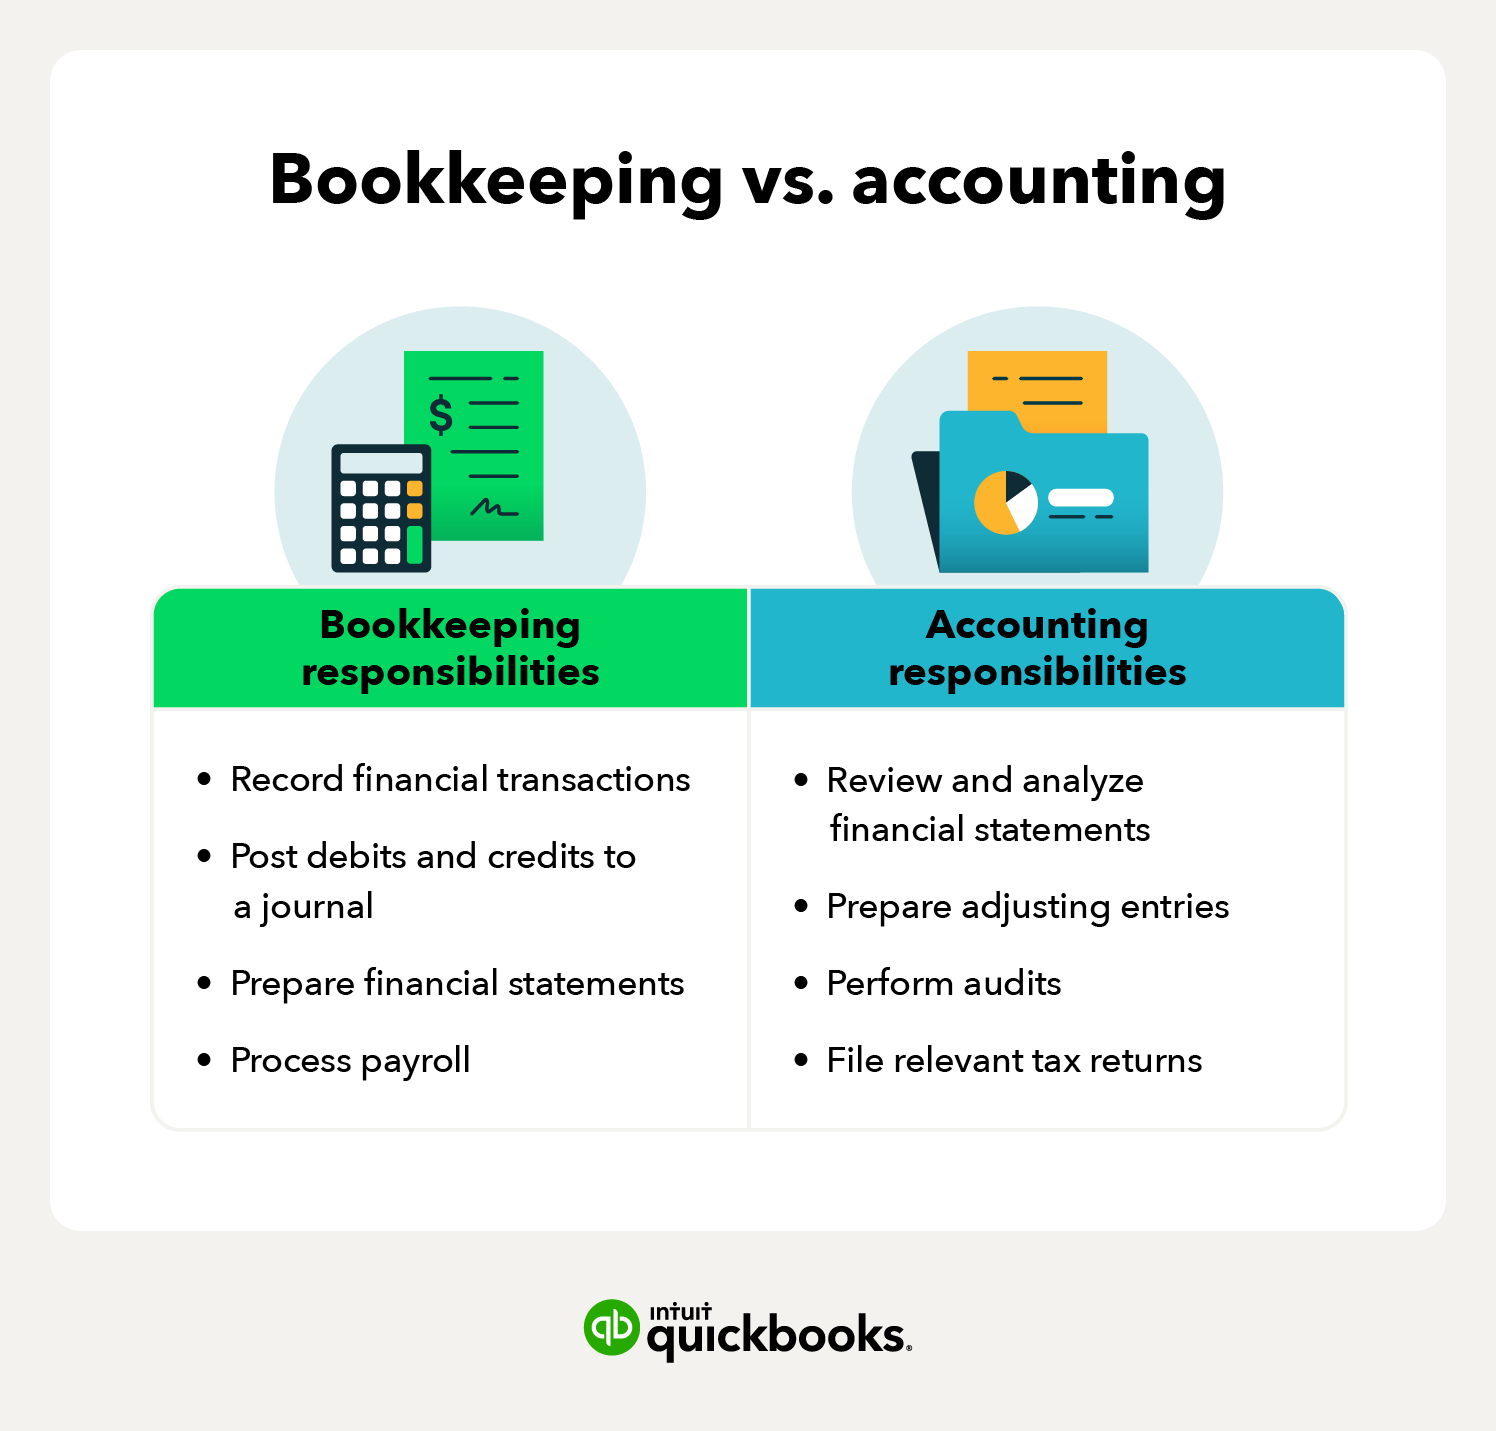 bookkeeping means